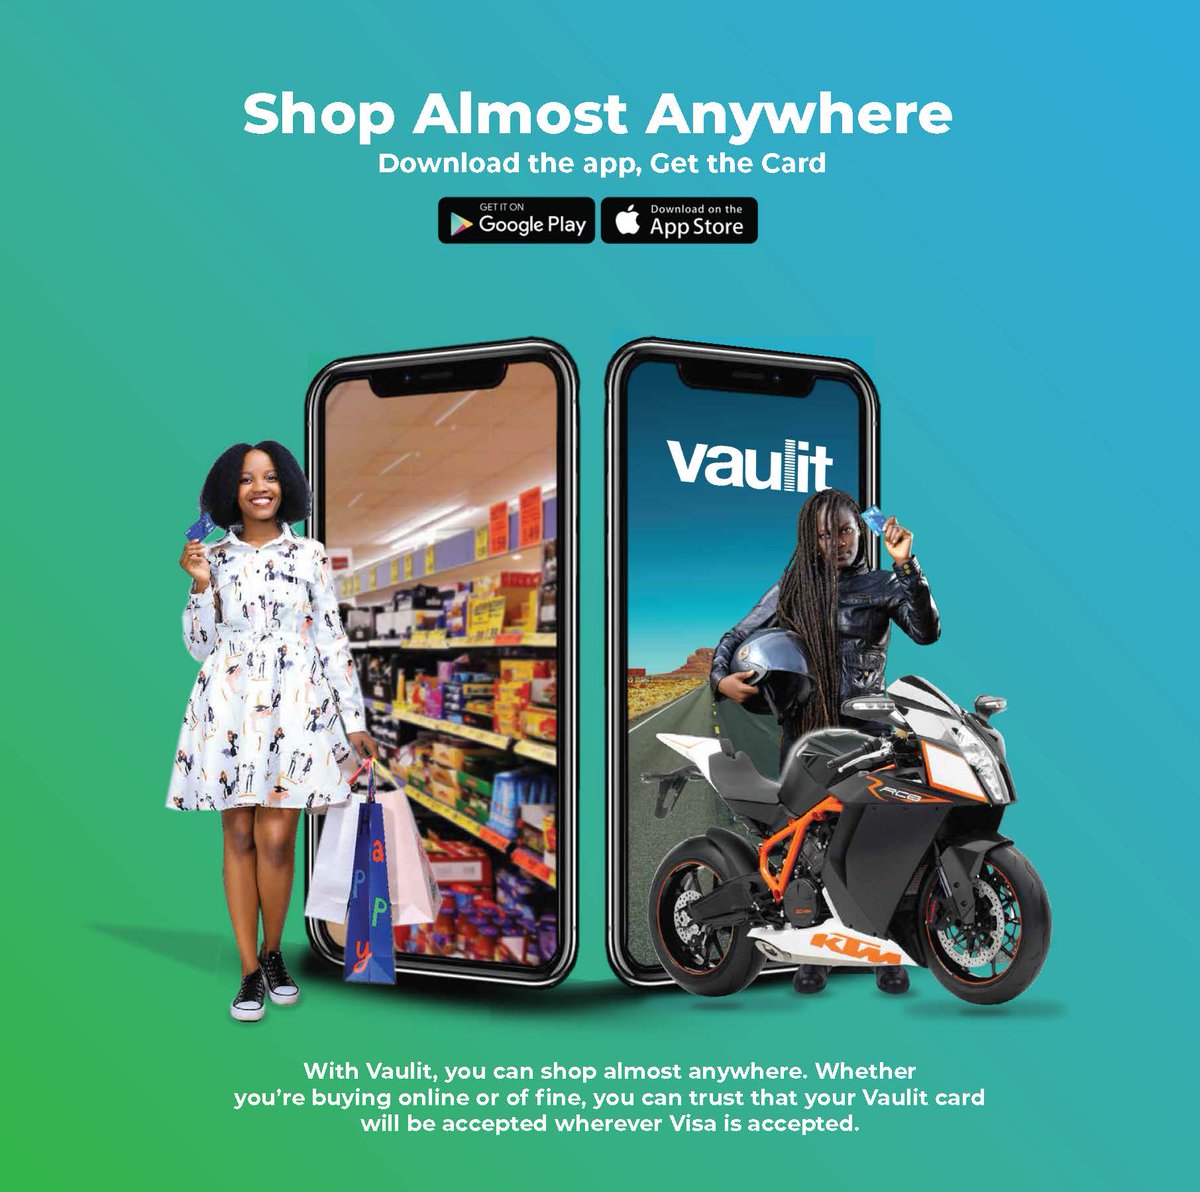 Dive into endless shopping for the things you love! 🛍️💳 Shop almost anywhere, online & offline, with Vaulit's prepaid VISA card. Be a part of our Beta List for early access!

Don't miss out! 🚀 Join now: vaulit.com/download/ #PowerYourPassion #ShopAnywhere'